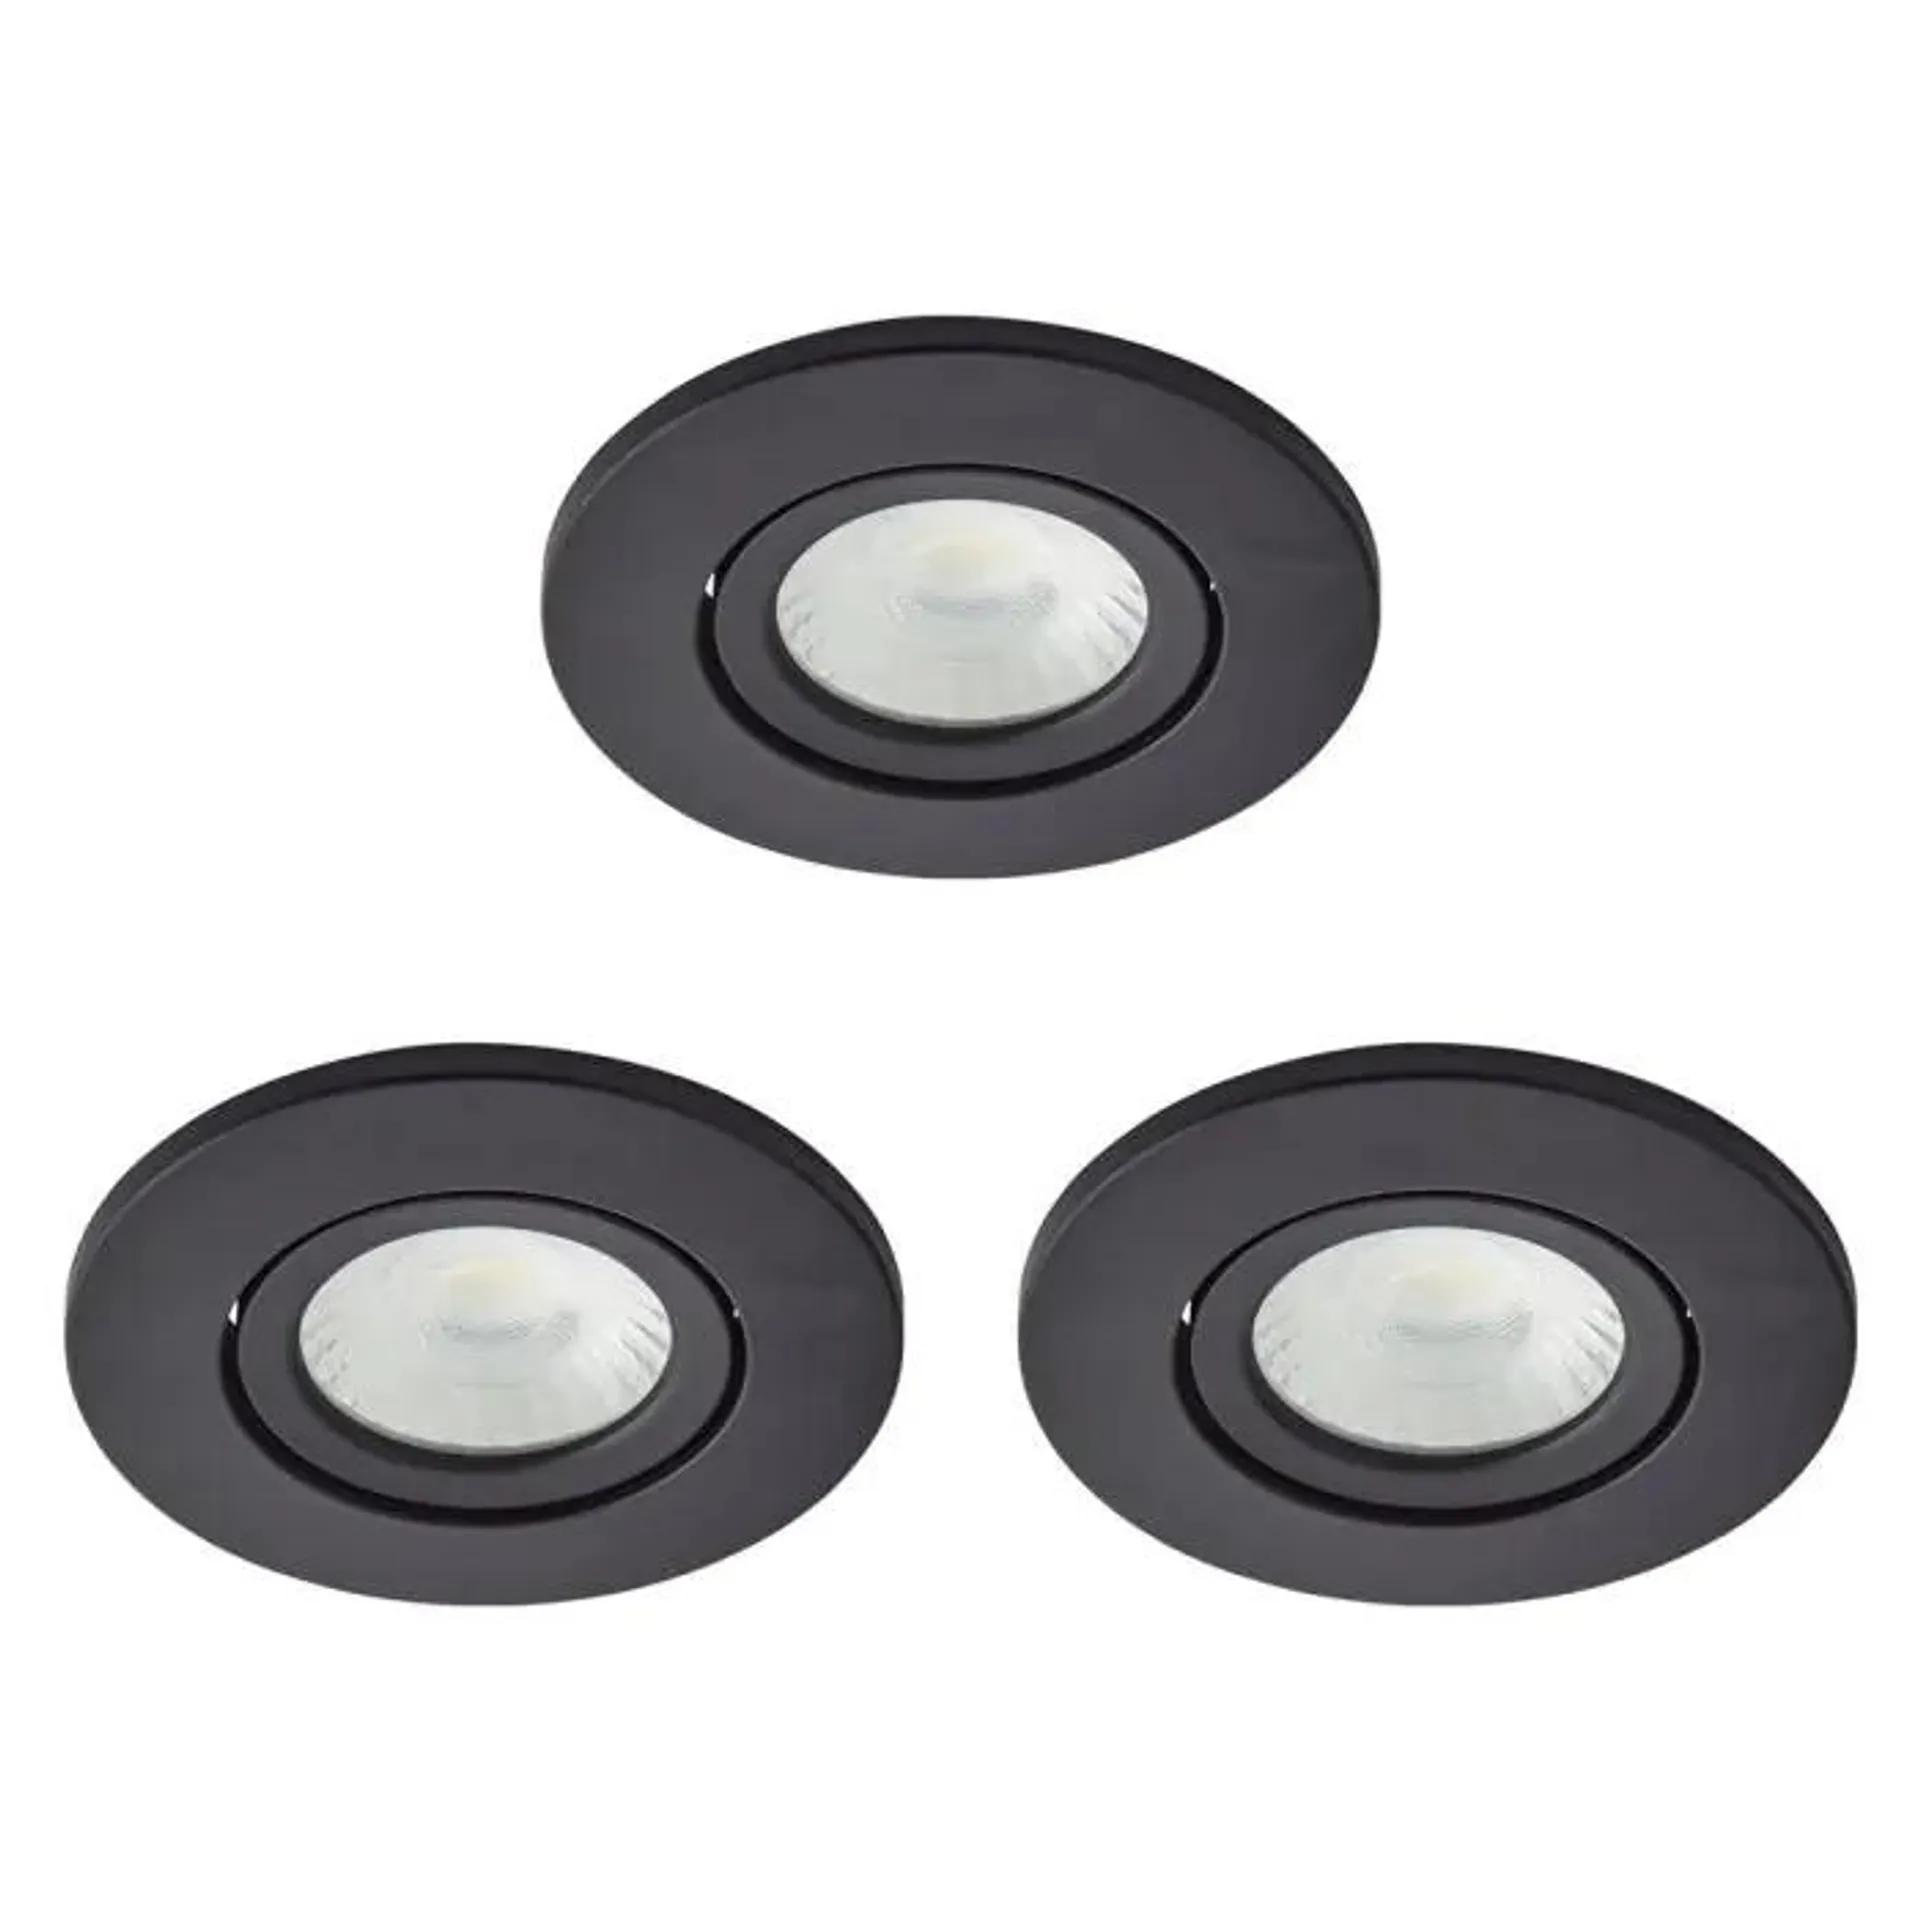 3 Pack of Ruva Fire Rated LED IP65 Downlight, Satin Black